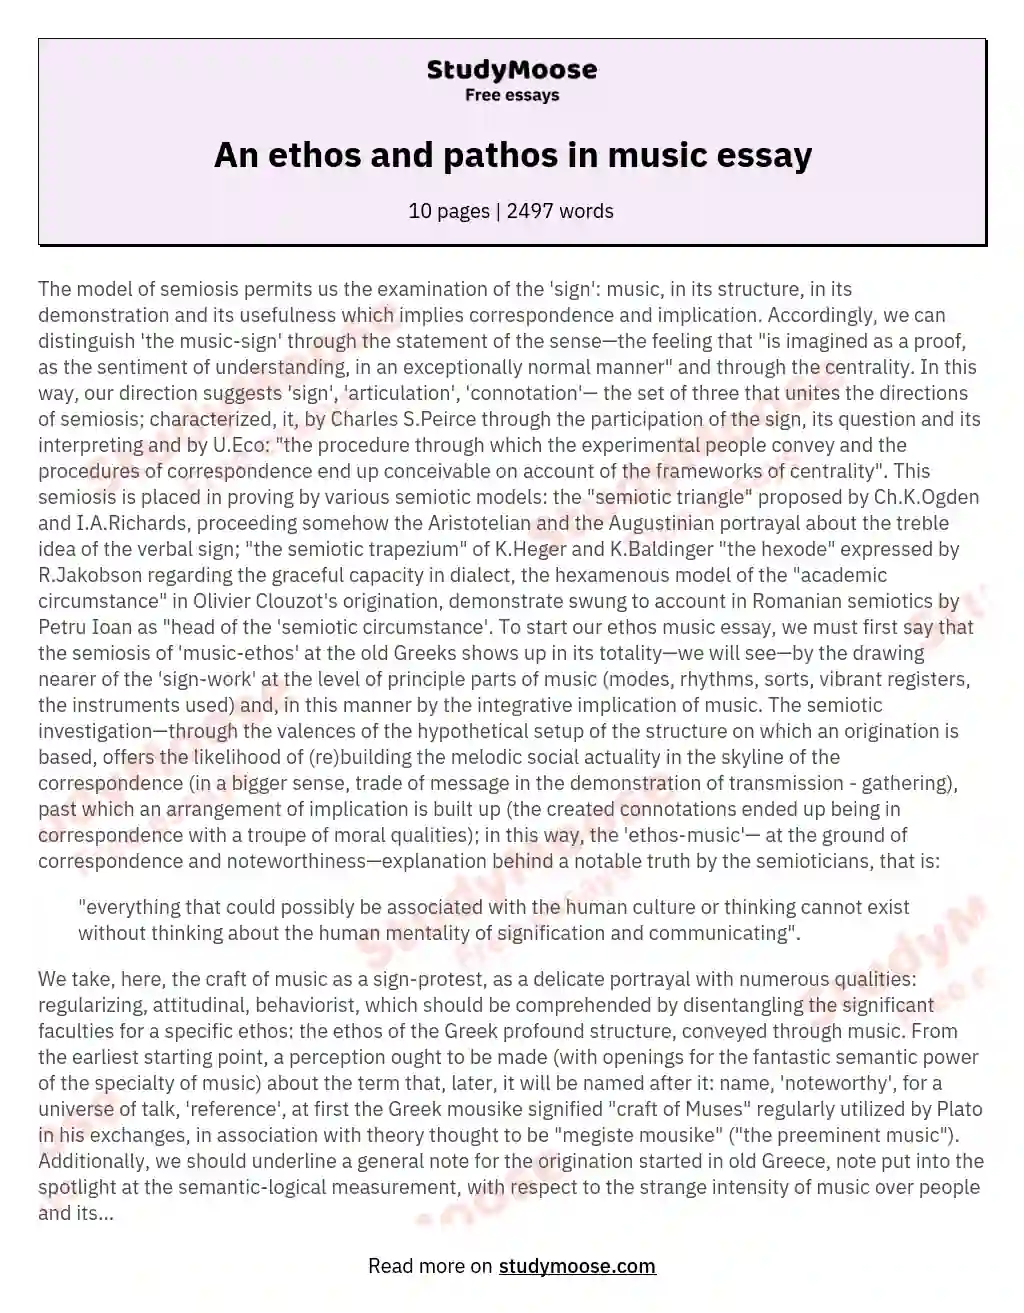 An ethos and pathos in music essay essay